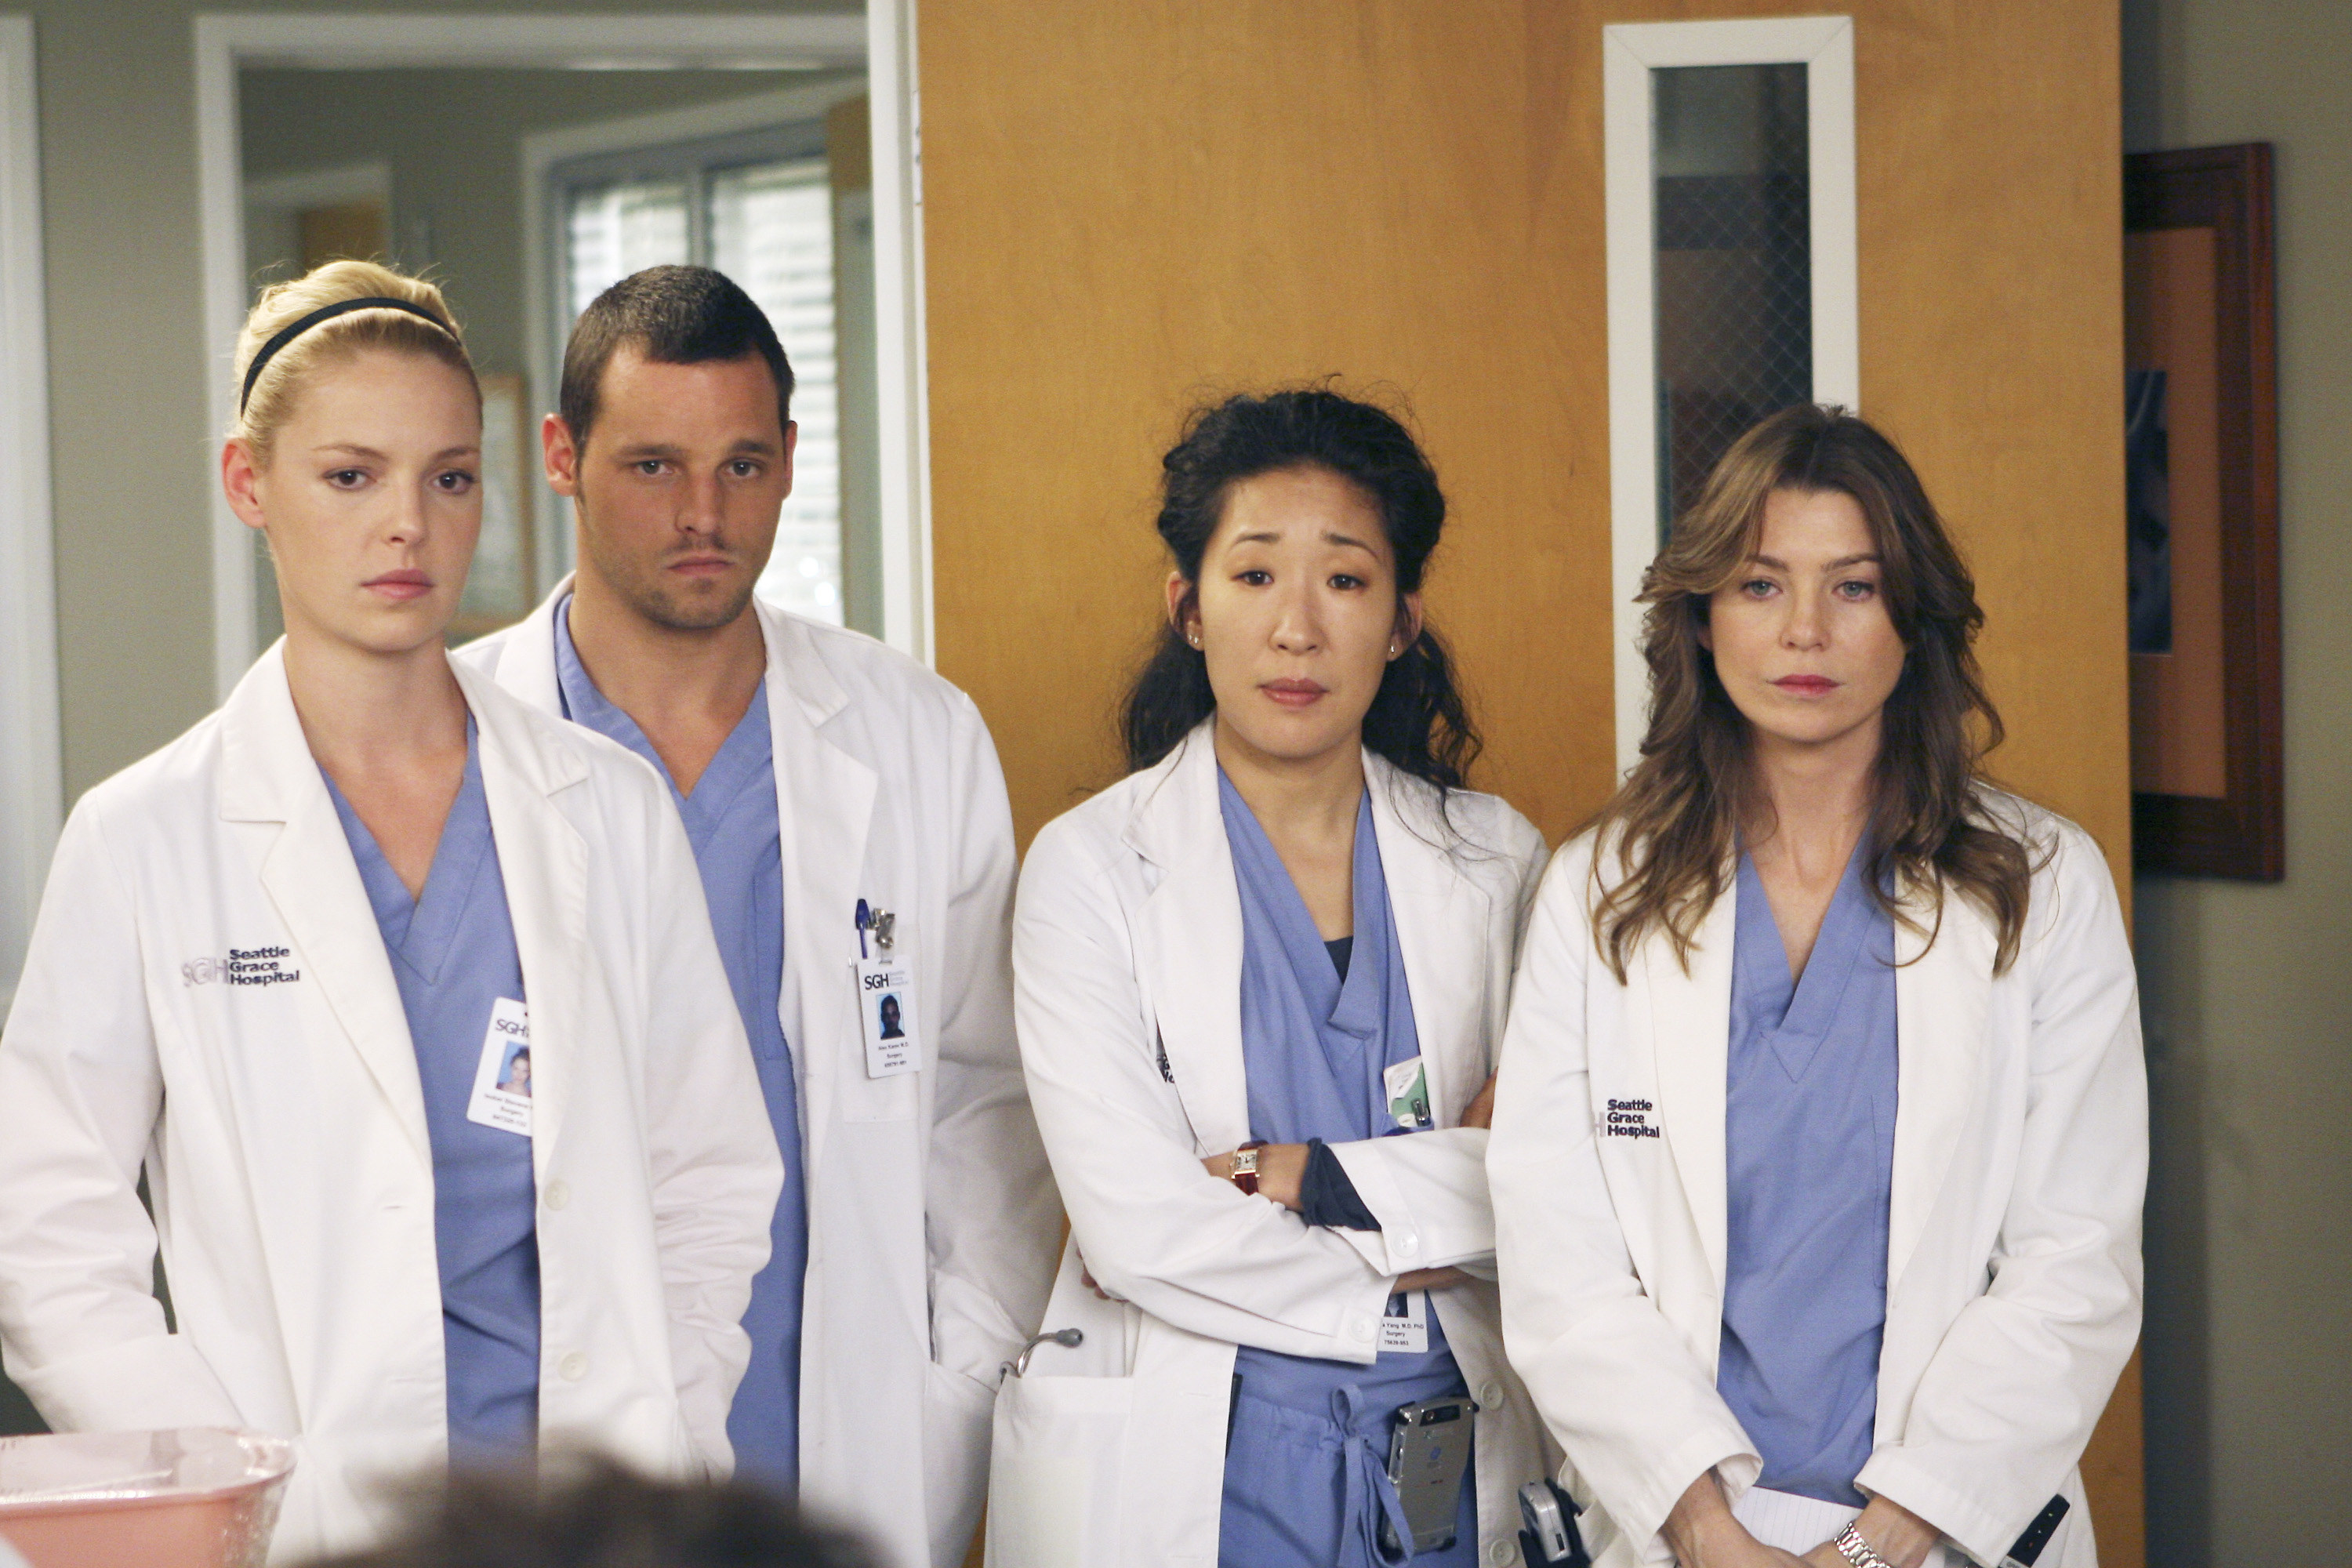 From left to right: Izzie, Alex Karev, Christina Yang, and Meredith